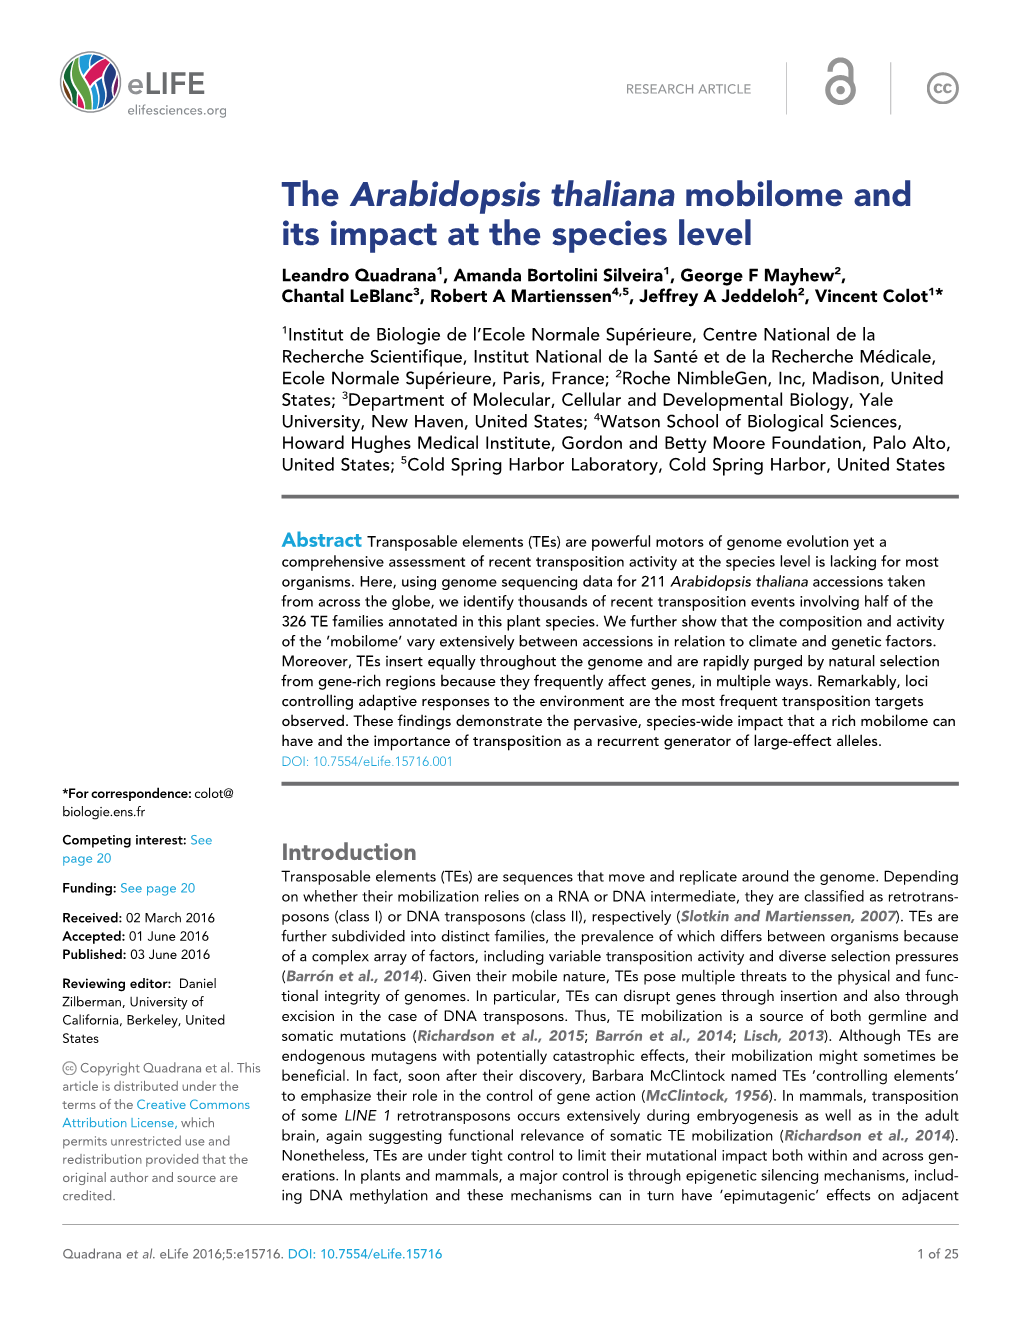 The Arabidopsis Thaliana Mobilome and Its Impact at the Species